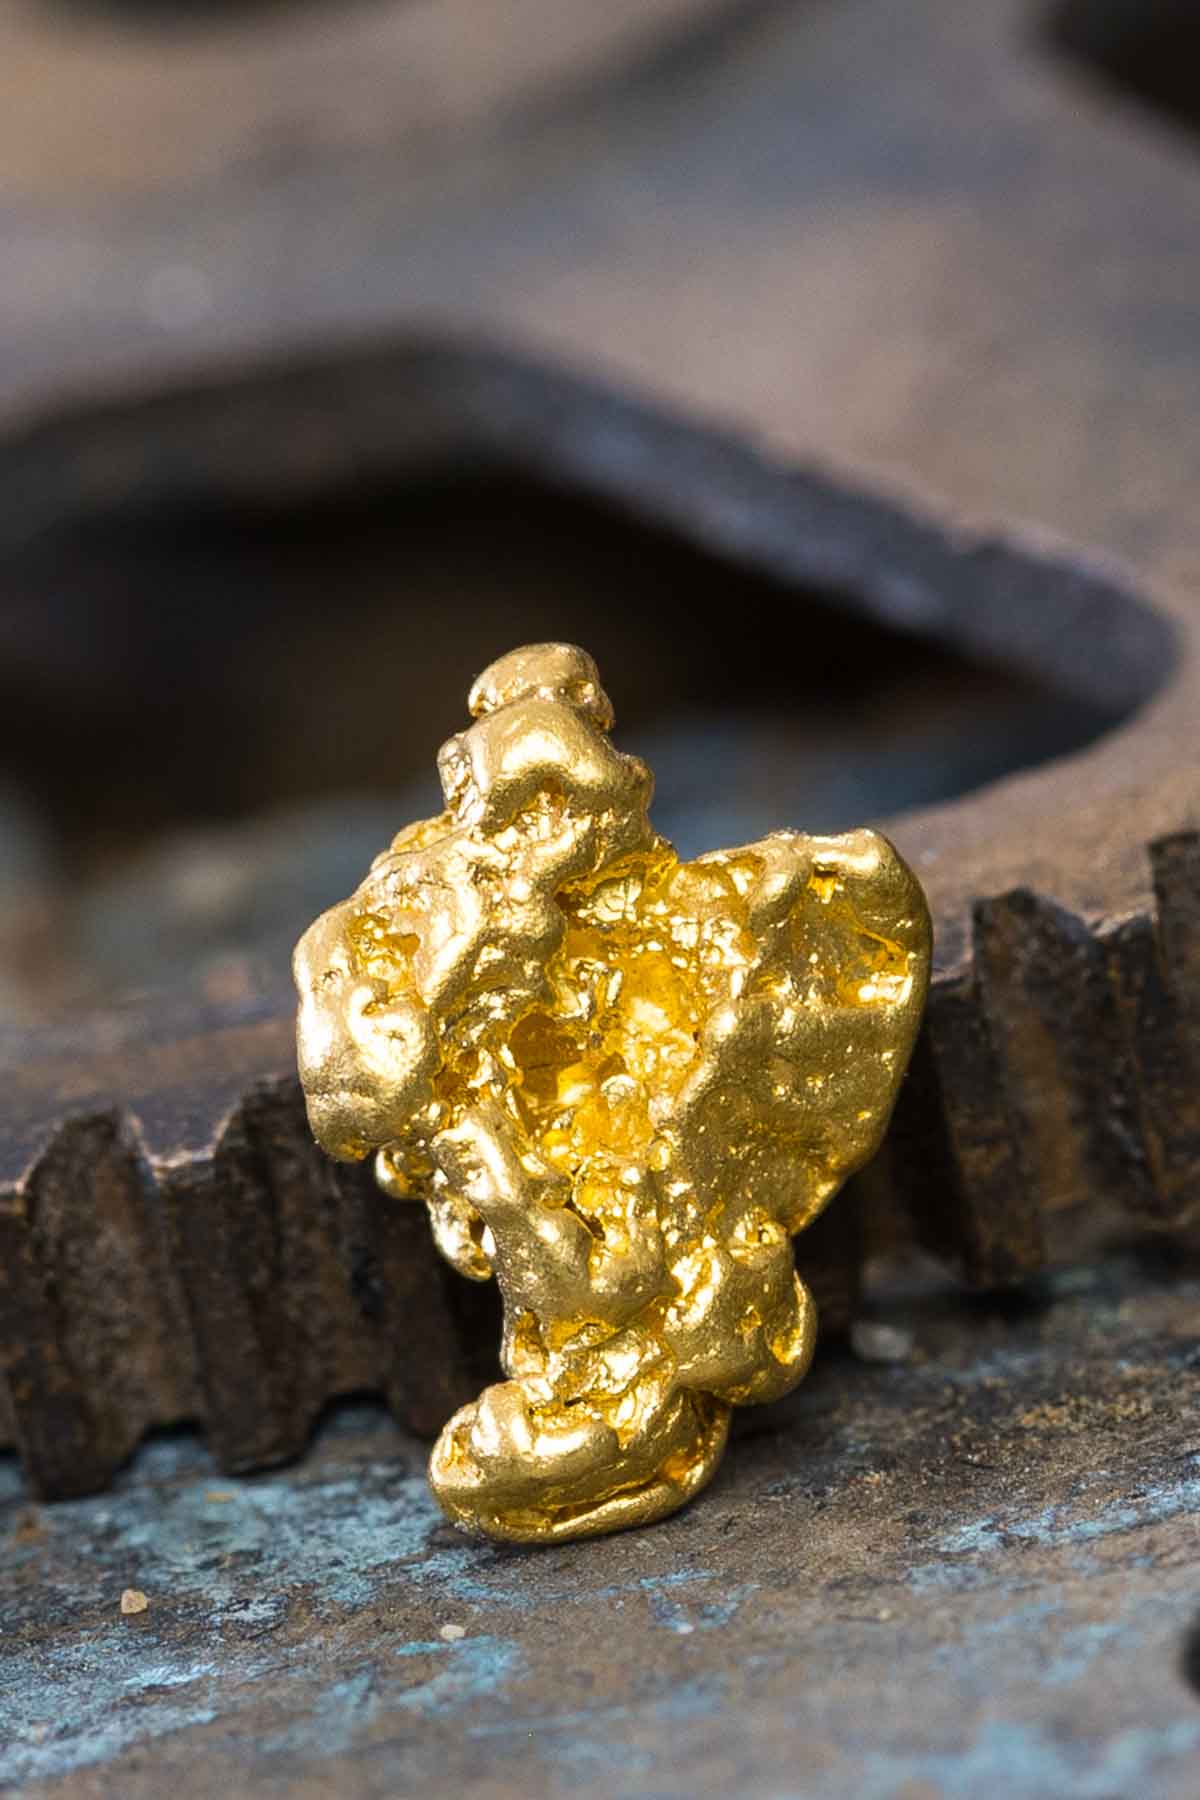 "Hooked" Triangle - Natural Gold Nugget from Park County, CO